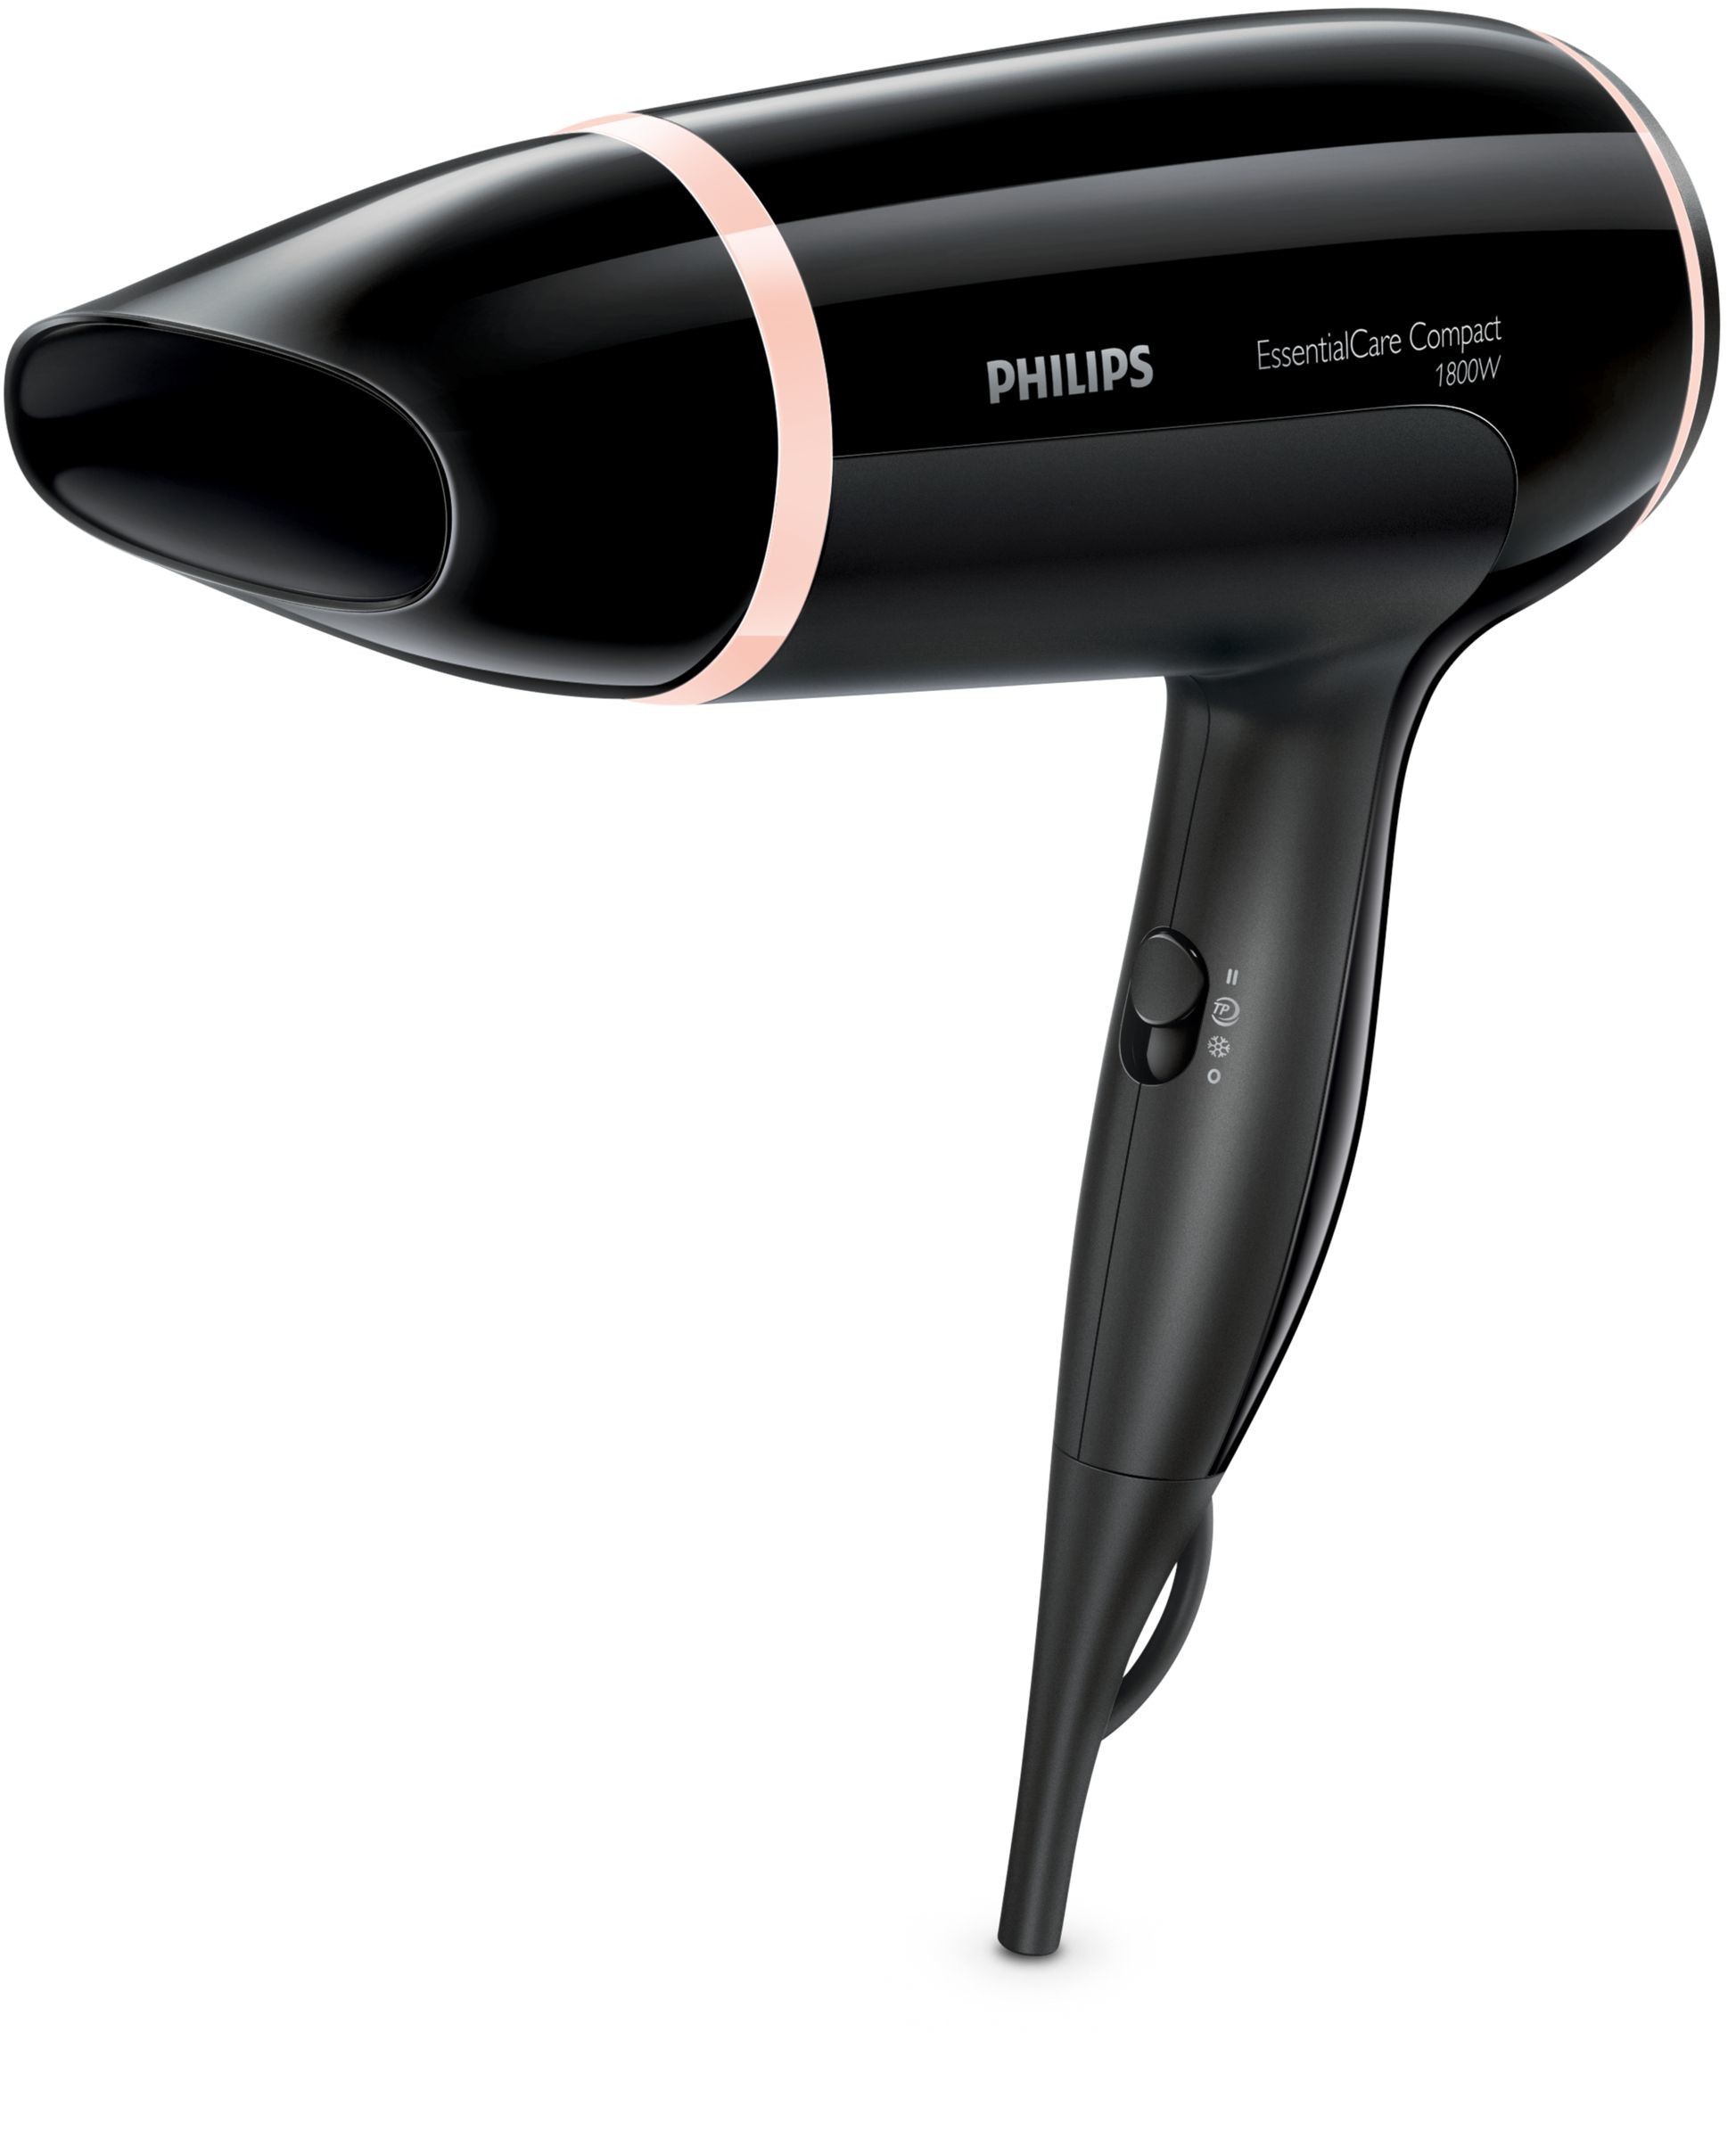 Philips BHD004/10 Essentialcare Compact Hair dryer